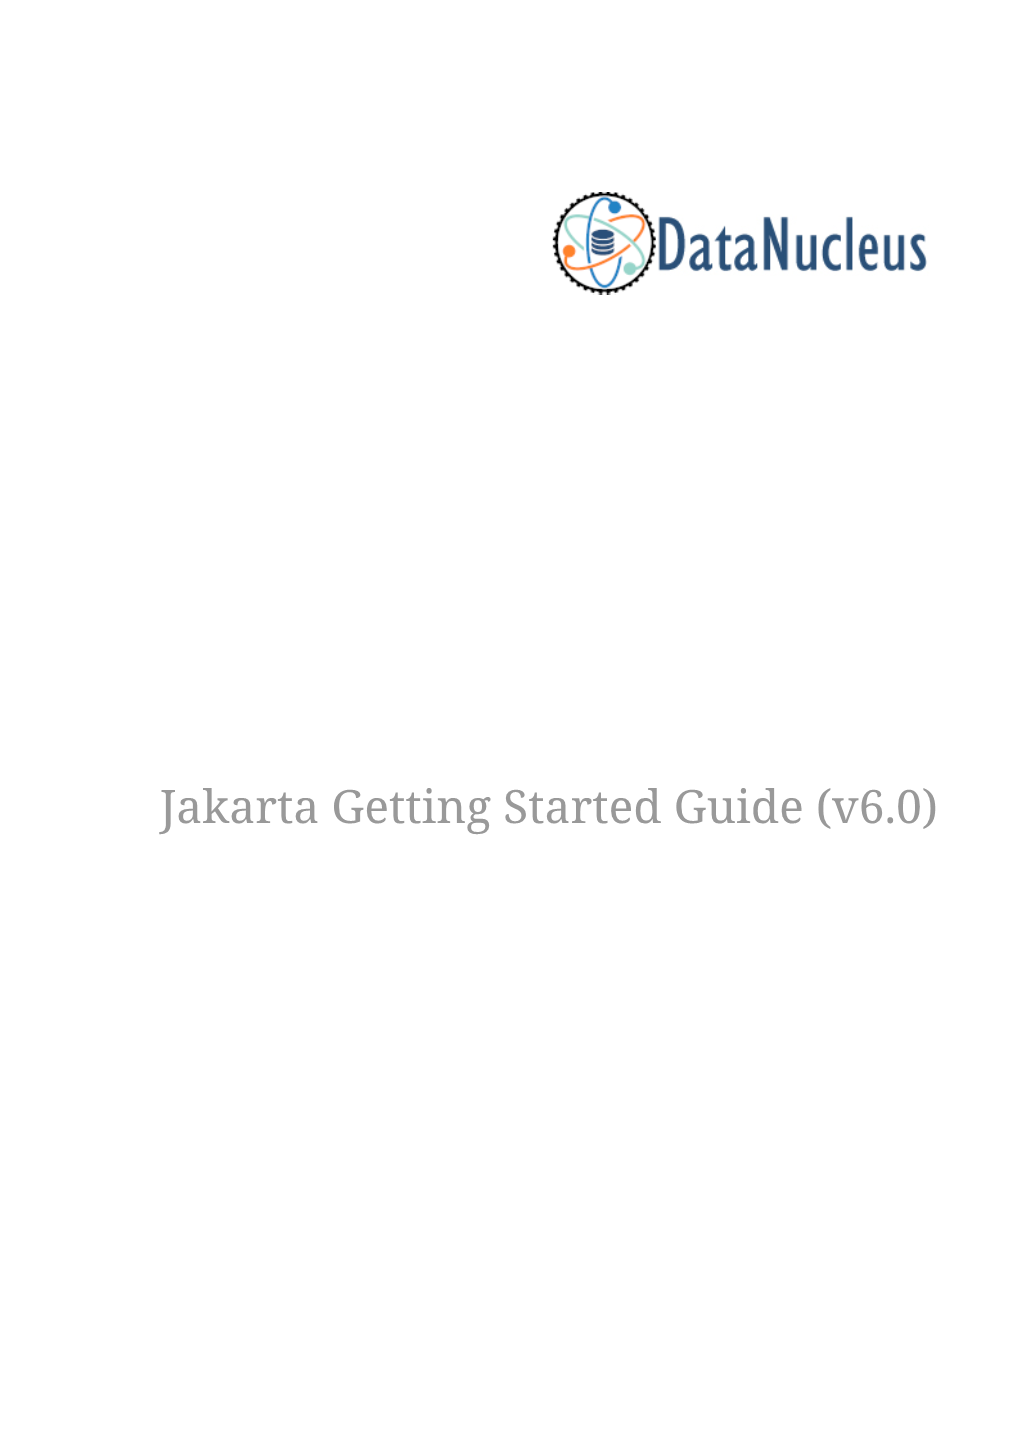 Jakarta Getting Started Guide (V6.0) Table of Contents